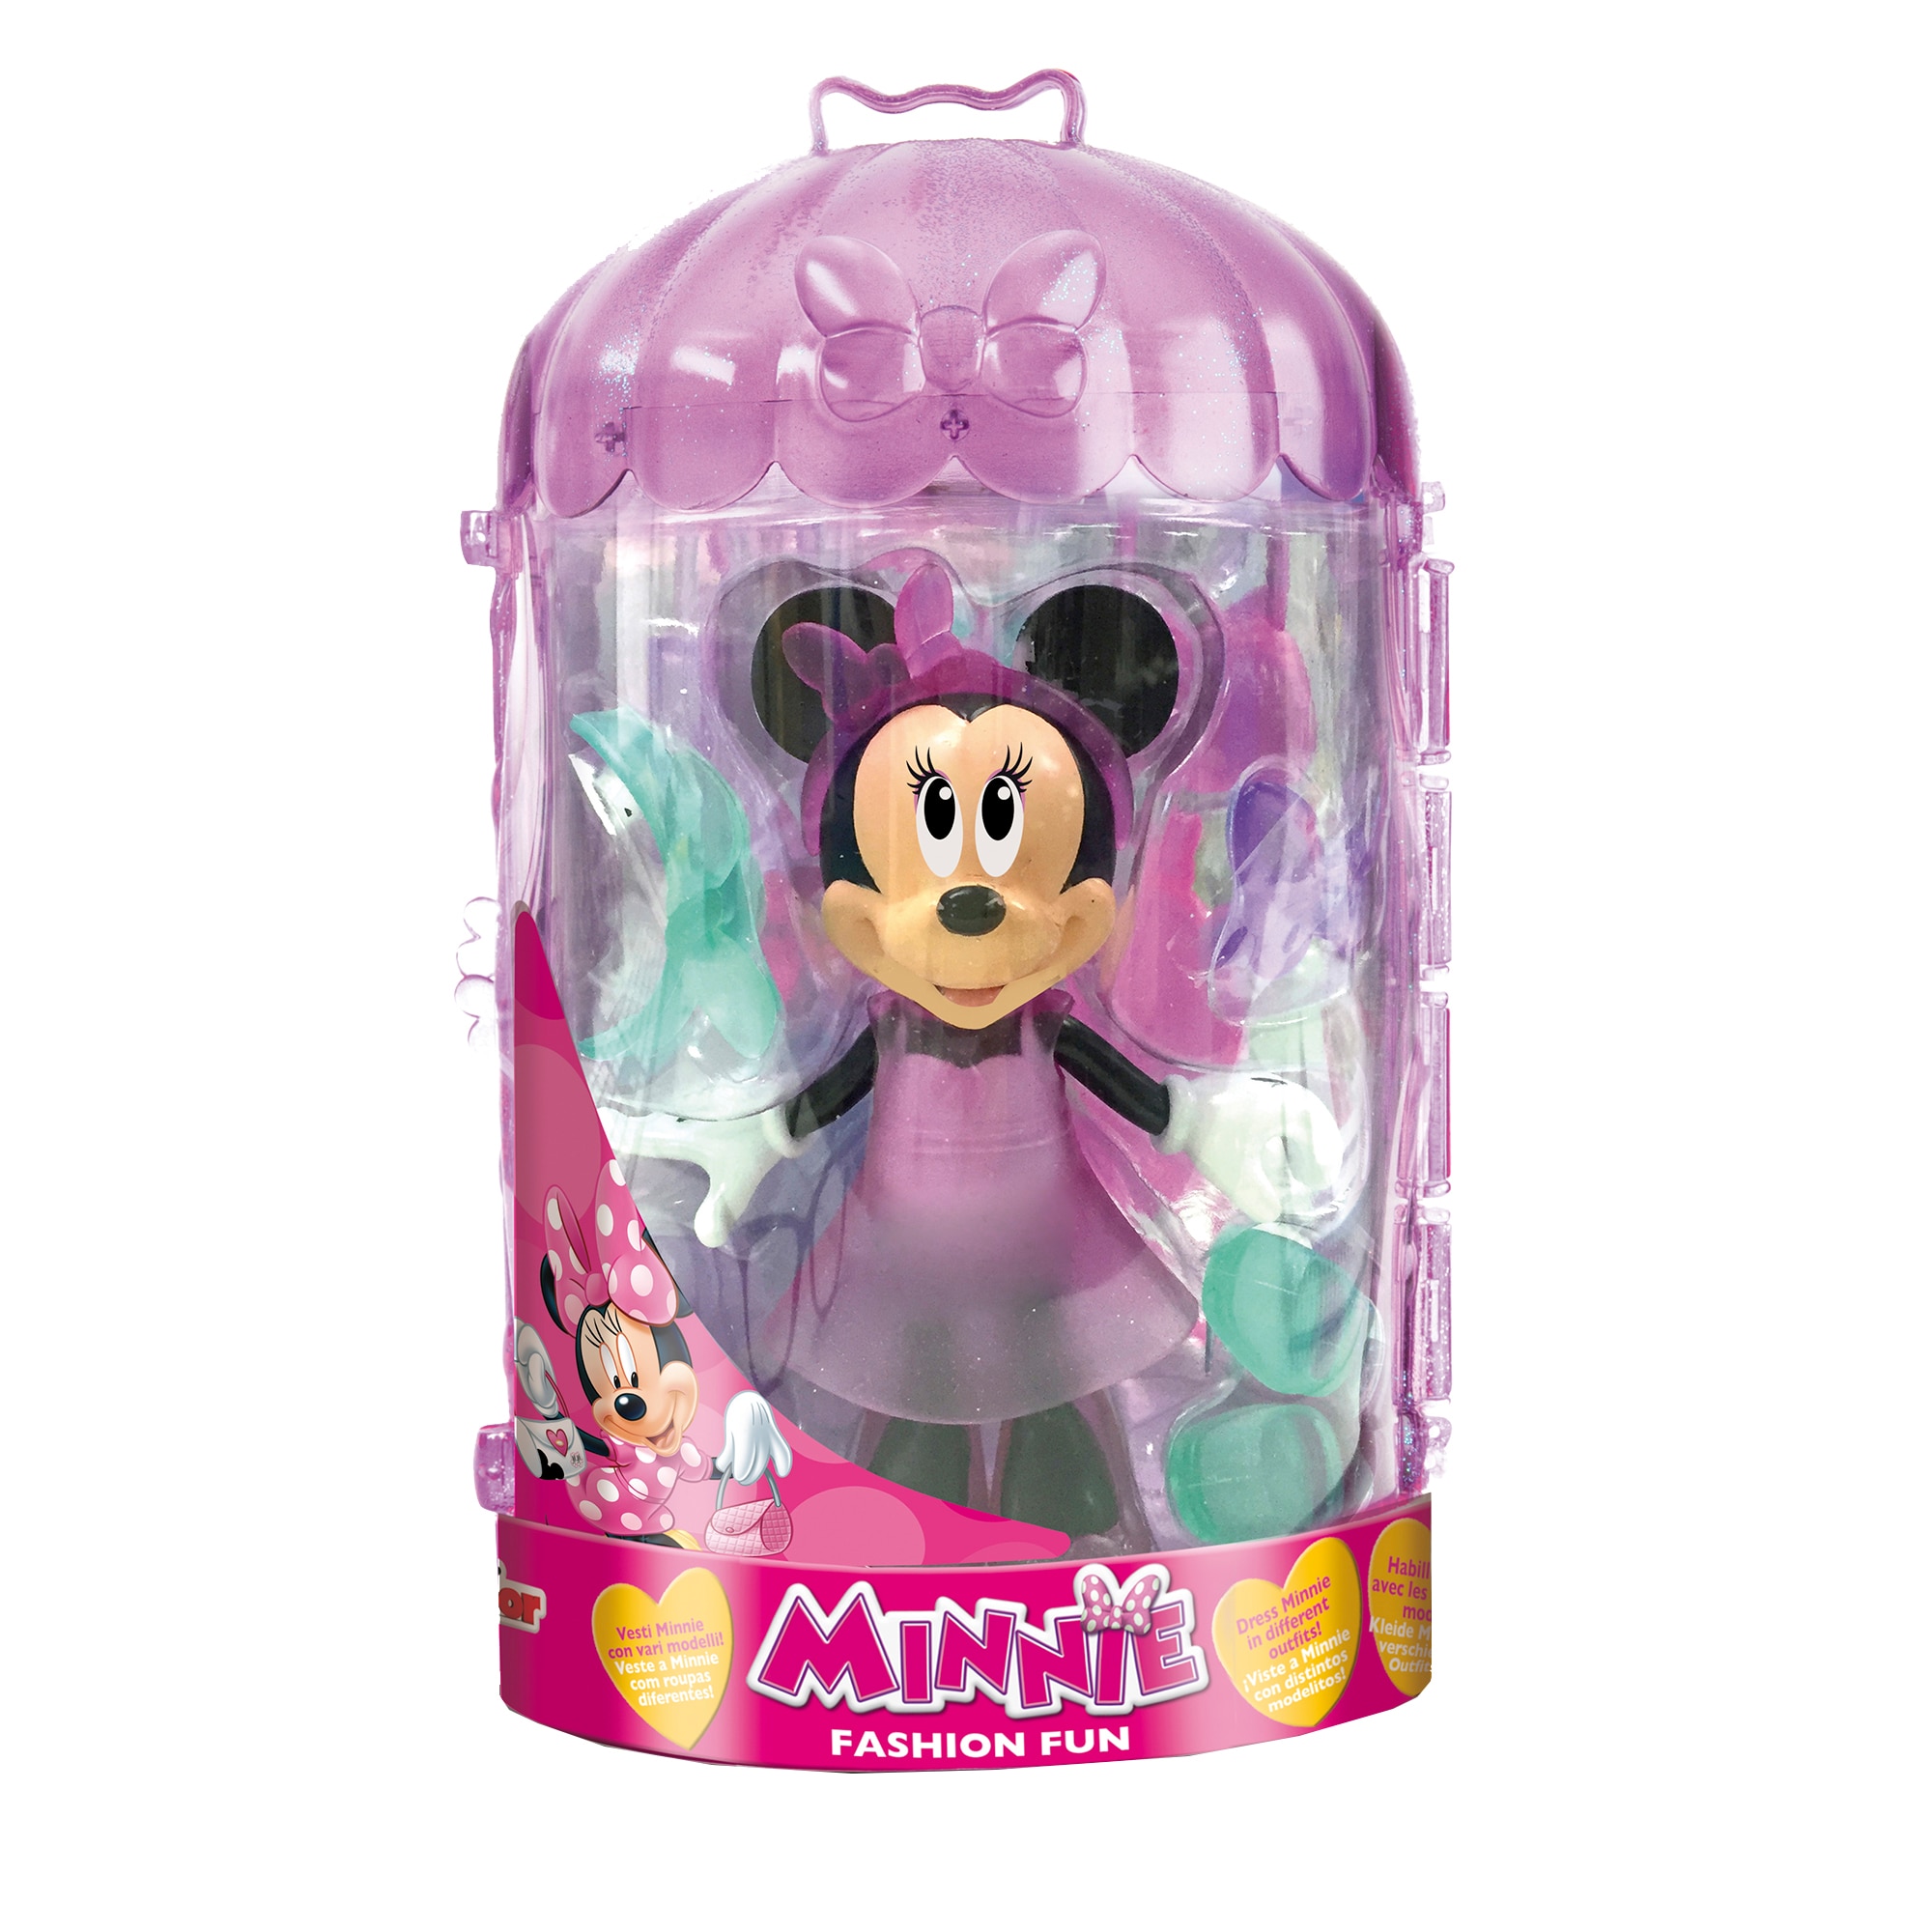 Try out Ready Dismissal Set de joaca IMC, Minnie Mouse cu accesorii fashion - eMAG.ro